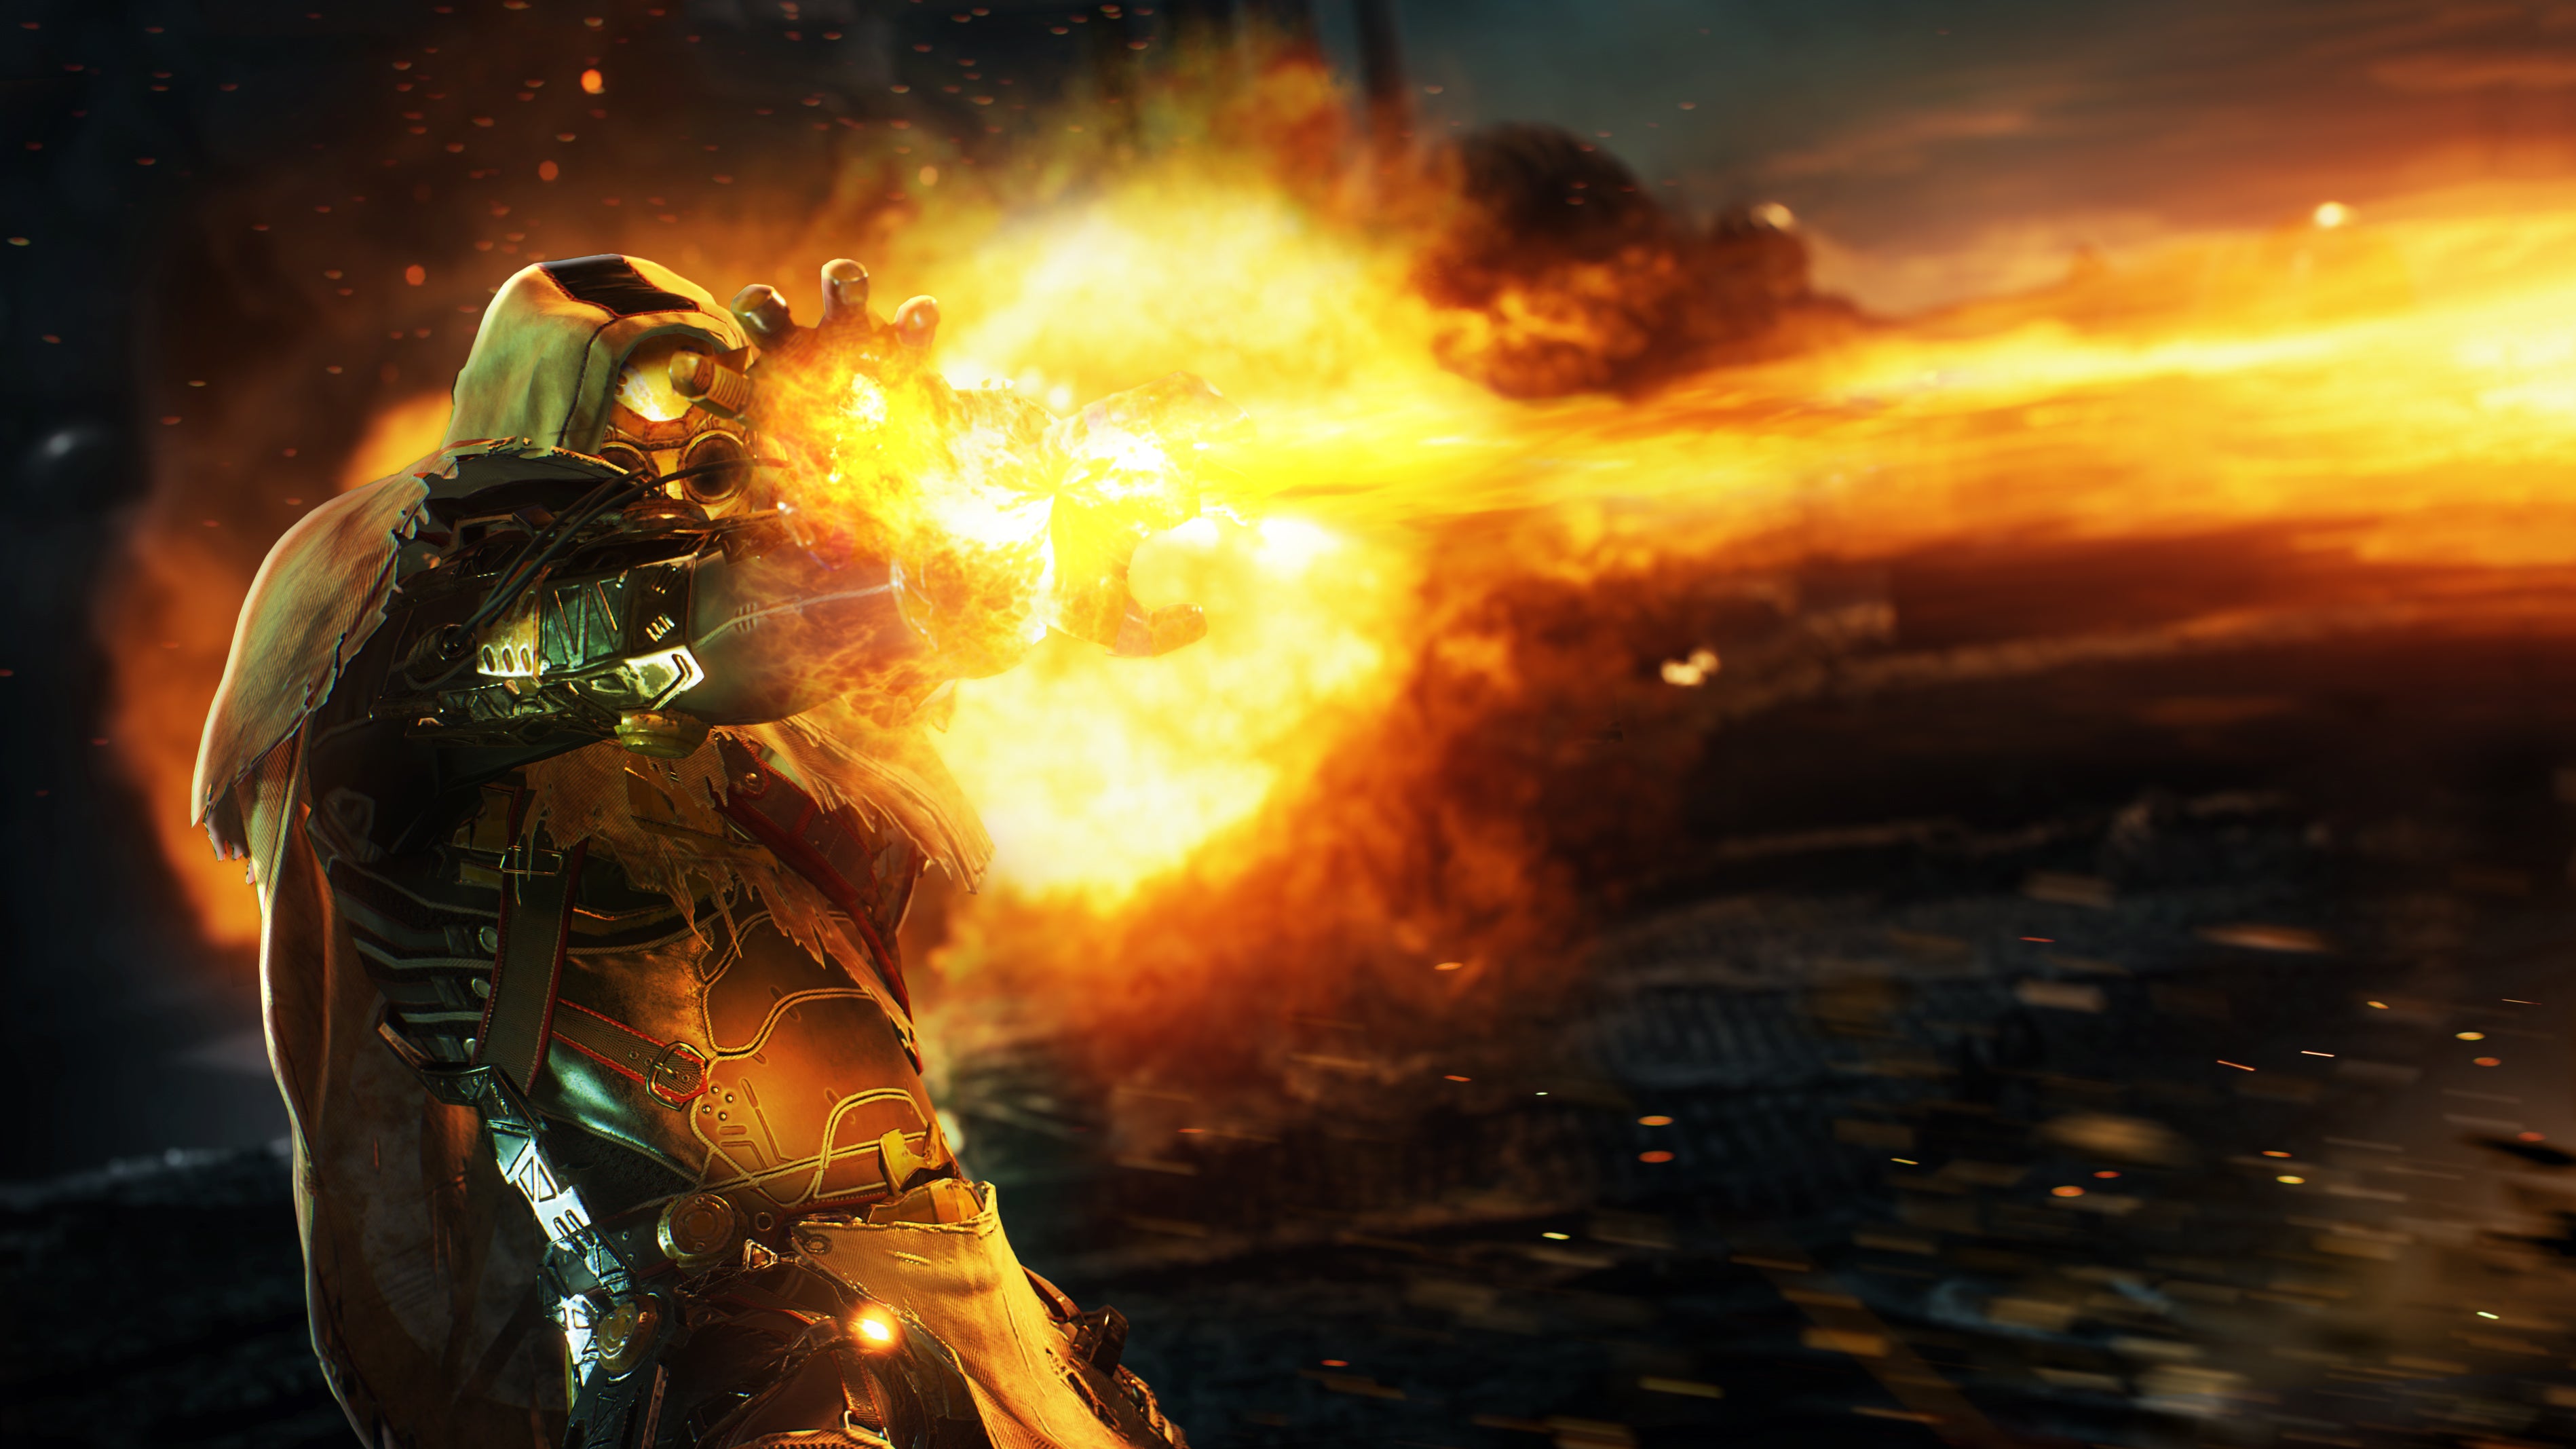 Promotional Outriders art showcasing a Pyromancer unleashing a beam of fiery energy at an enemy offscreen.